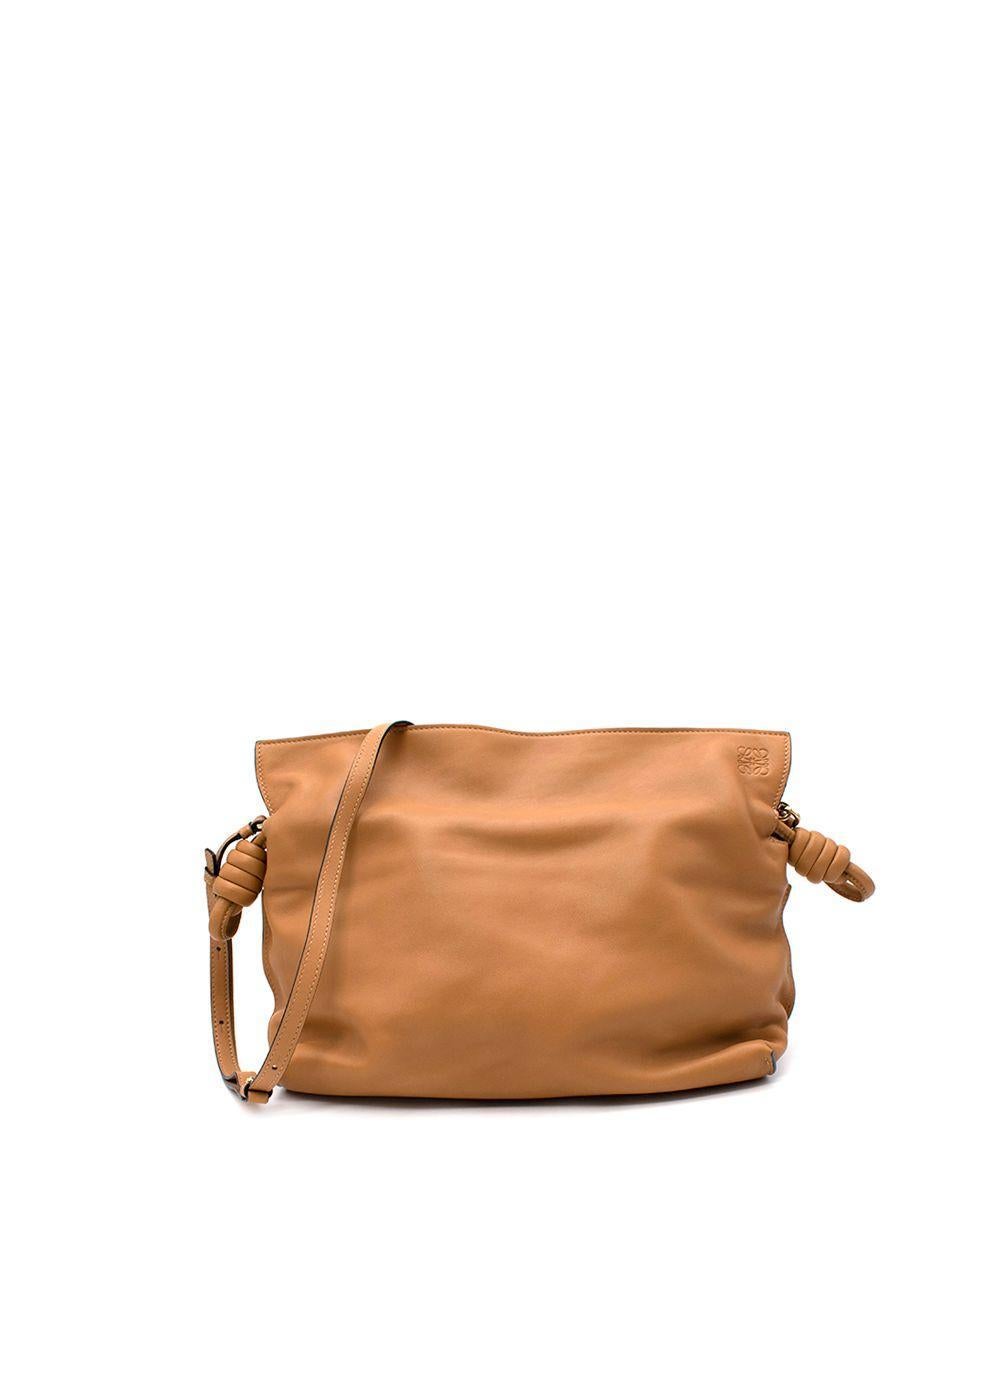 Loewe Tan Brown Leather Mini Flamenco Knot Clutch Bag

- Rolled leather drawstring cinch closure with coiled knots
- Removable crossbody strap
- Subtle magnetic closure
- Suede lined
- Embossed anagram logo

Materials:
Calfskin

Made in